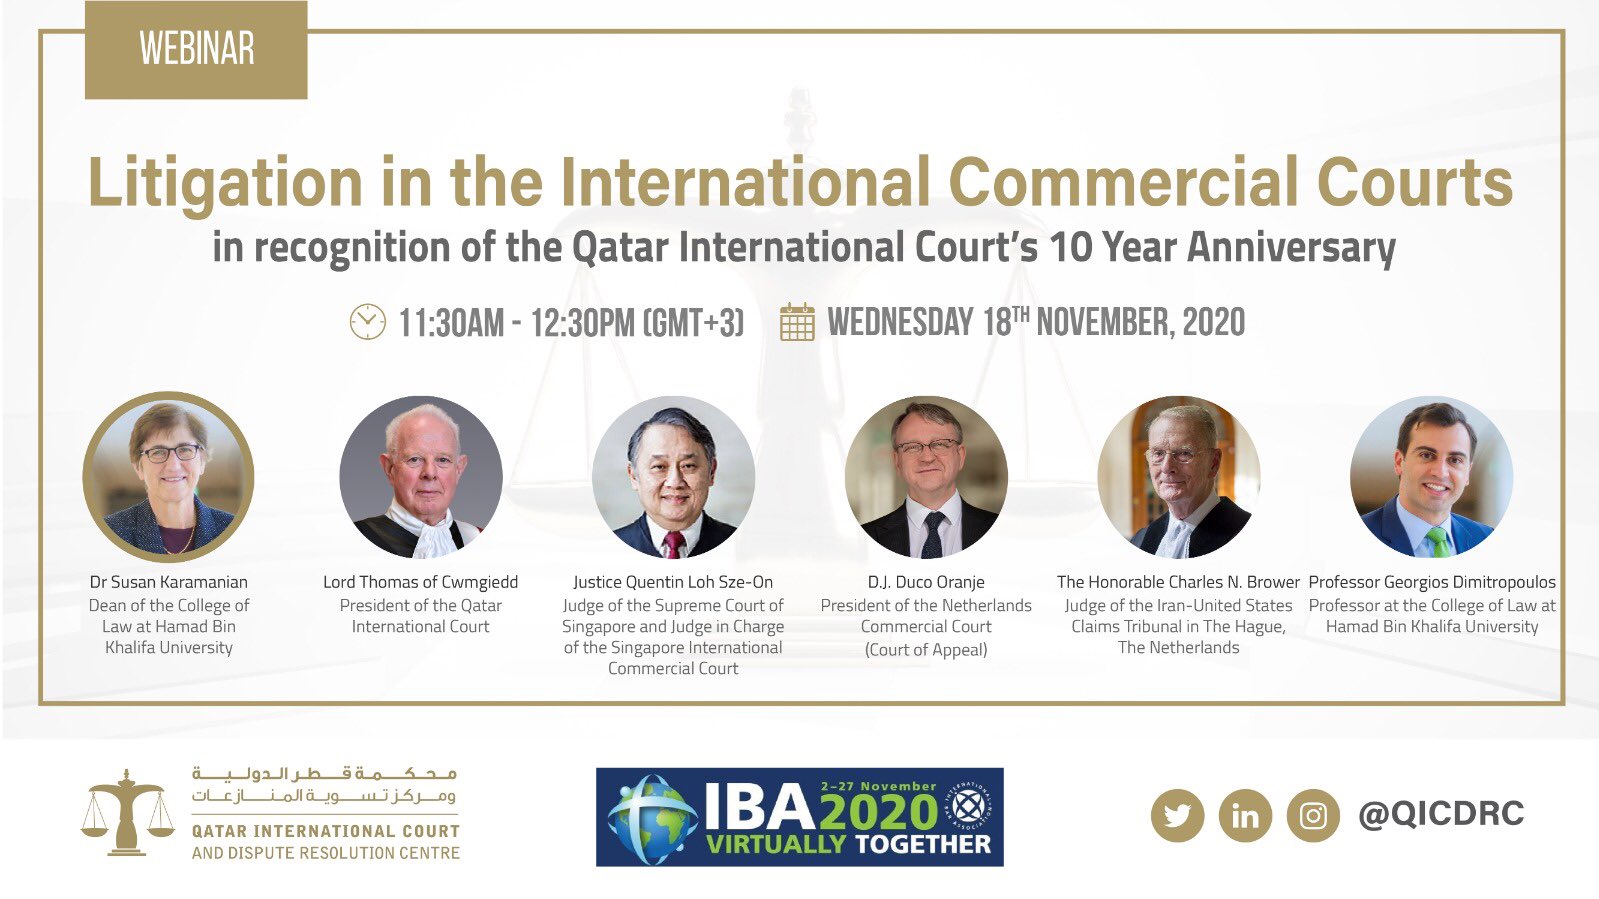 Litigation in the International Commercial Courts - in recognition of the Qatar International Court’s 10 Year Anniversary